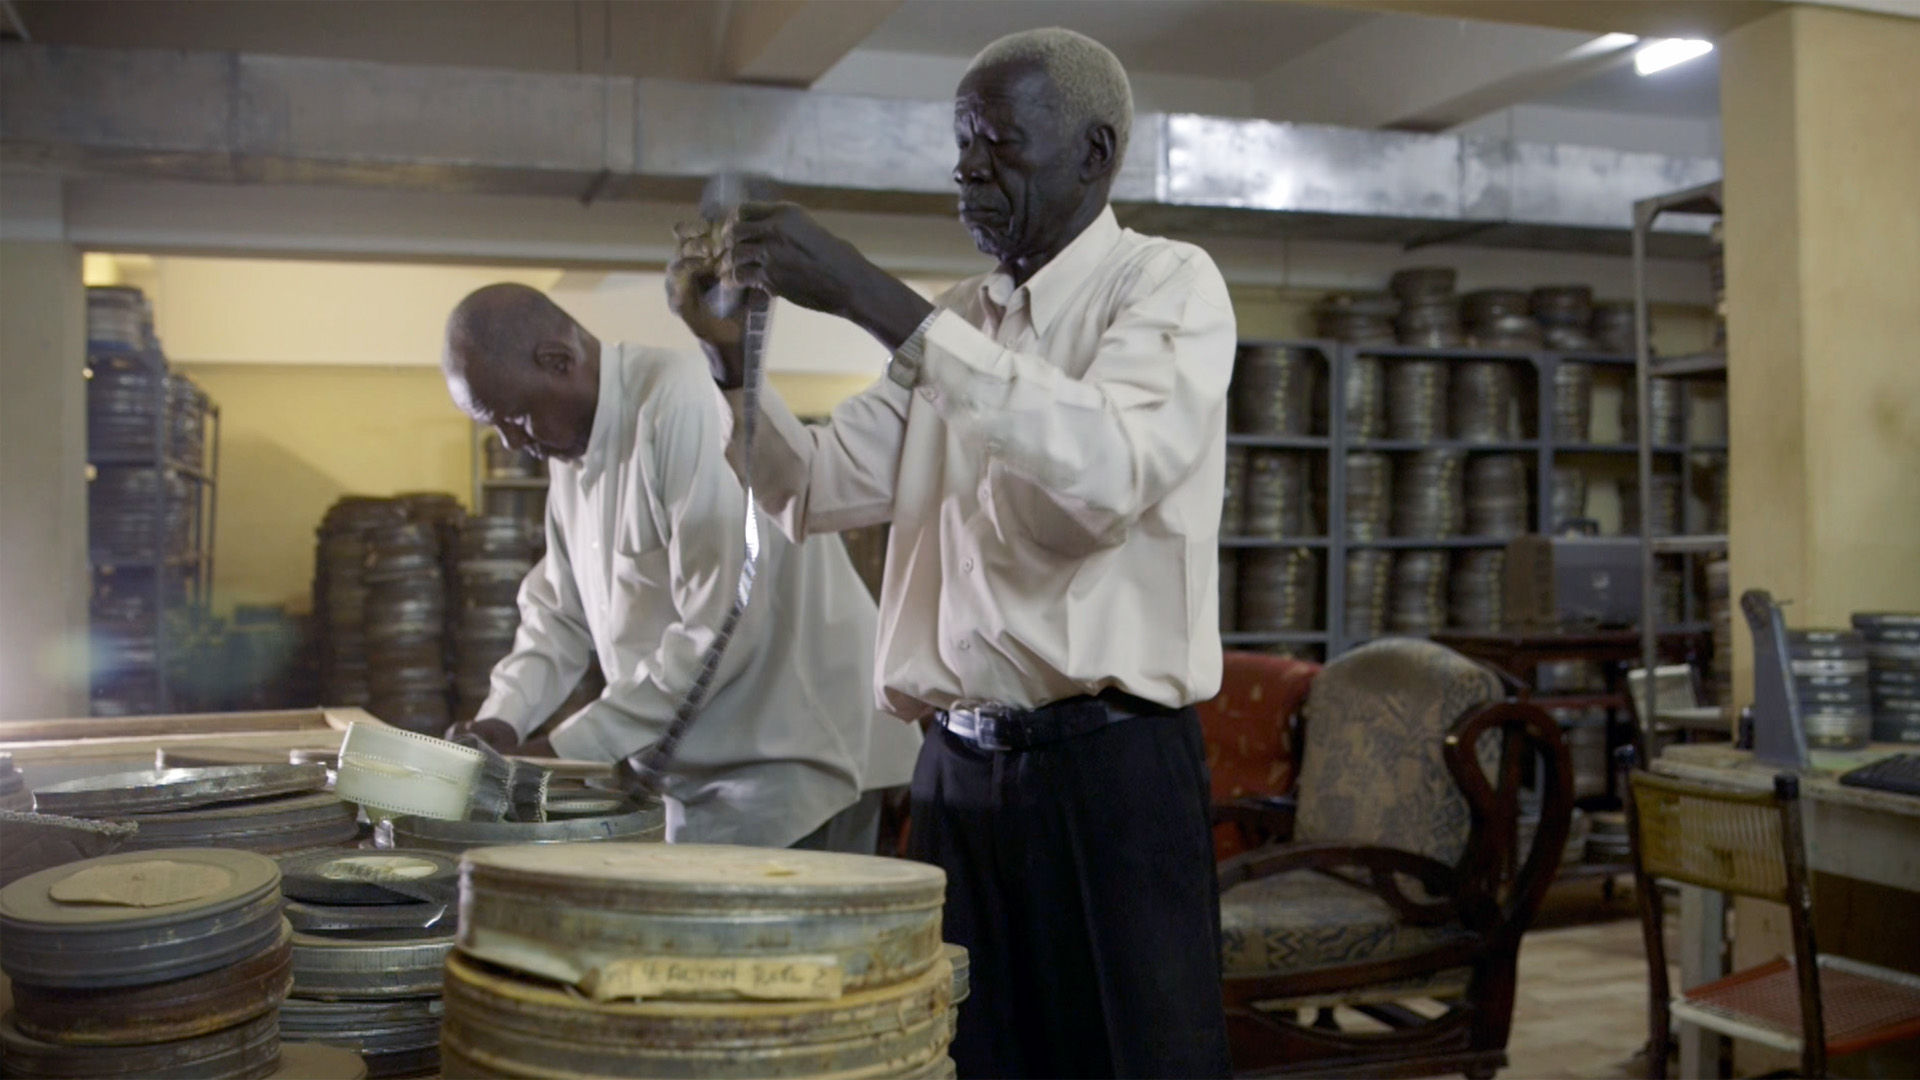 Awad (left) and Benjamin spend their days surrounded by more than 13,000 old films - many of them one of a kind [Screengrab/Al Jazeera]